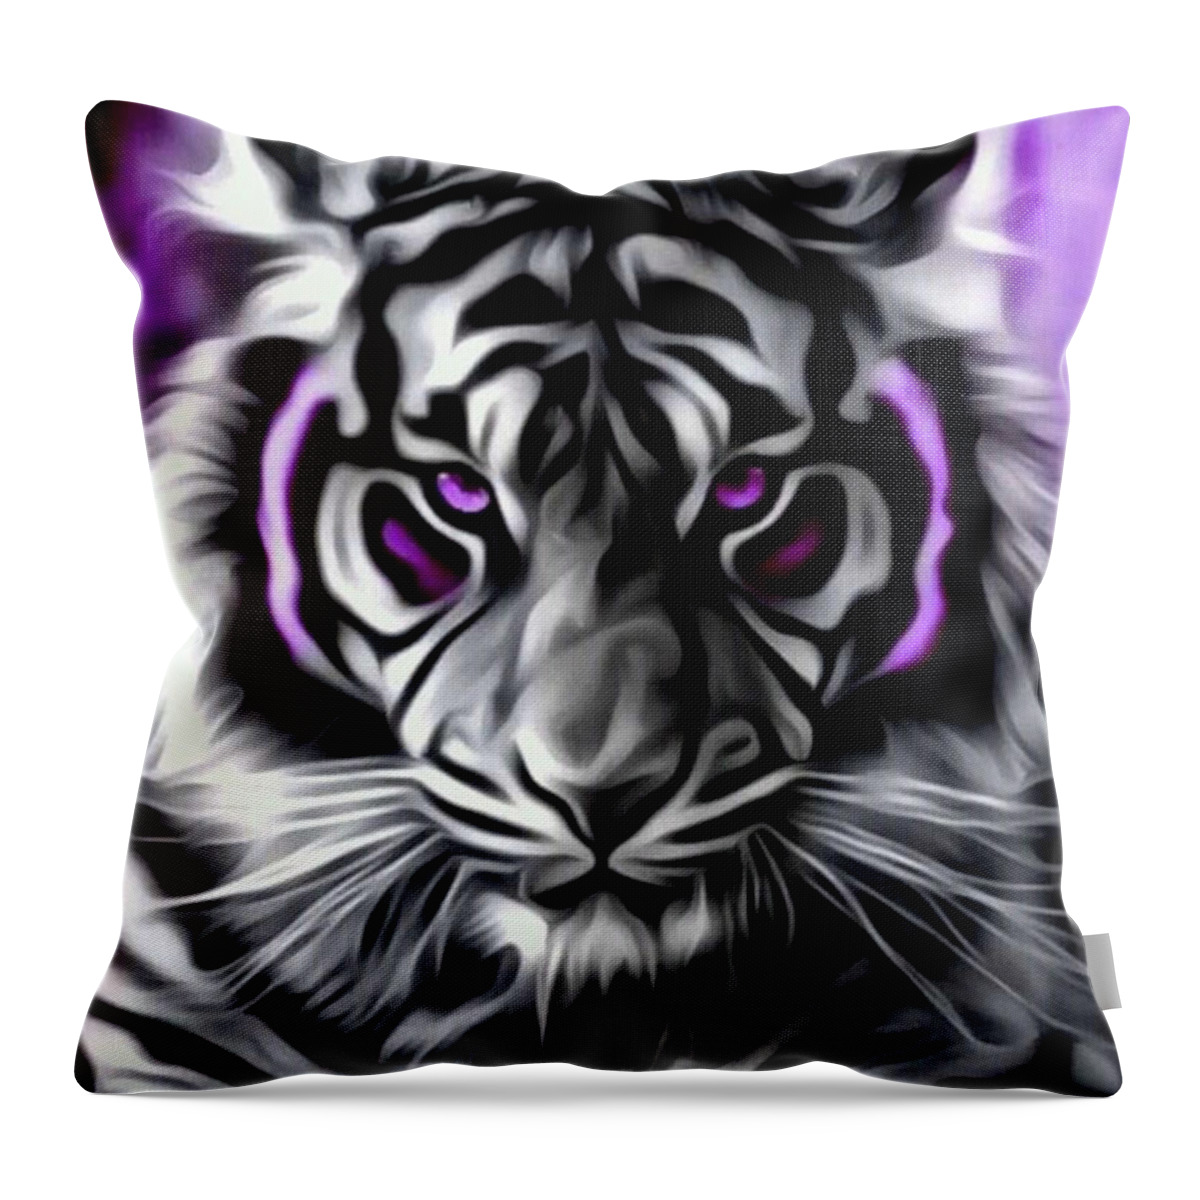 Tiger Throw Pillow featuring the digital art Tiger by Mopssy Stopsy